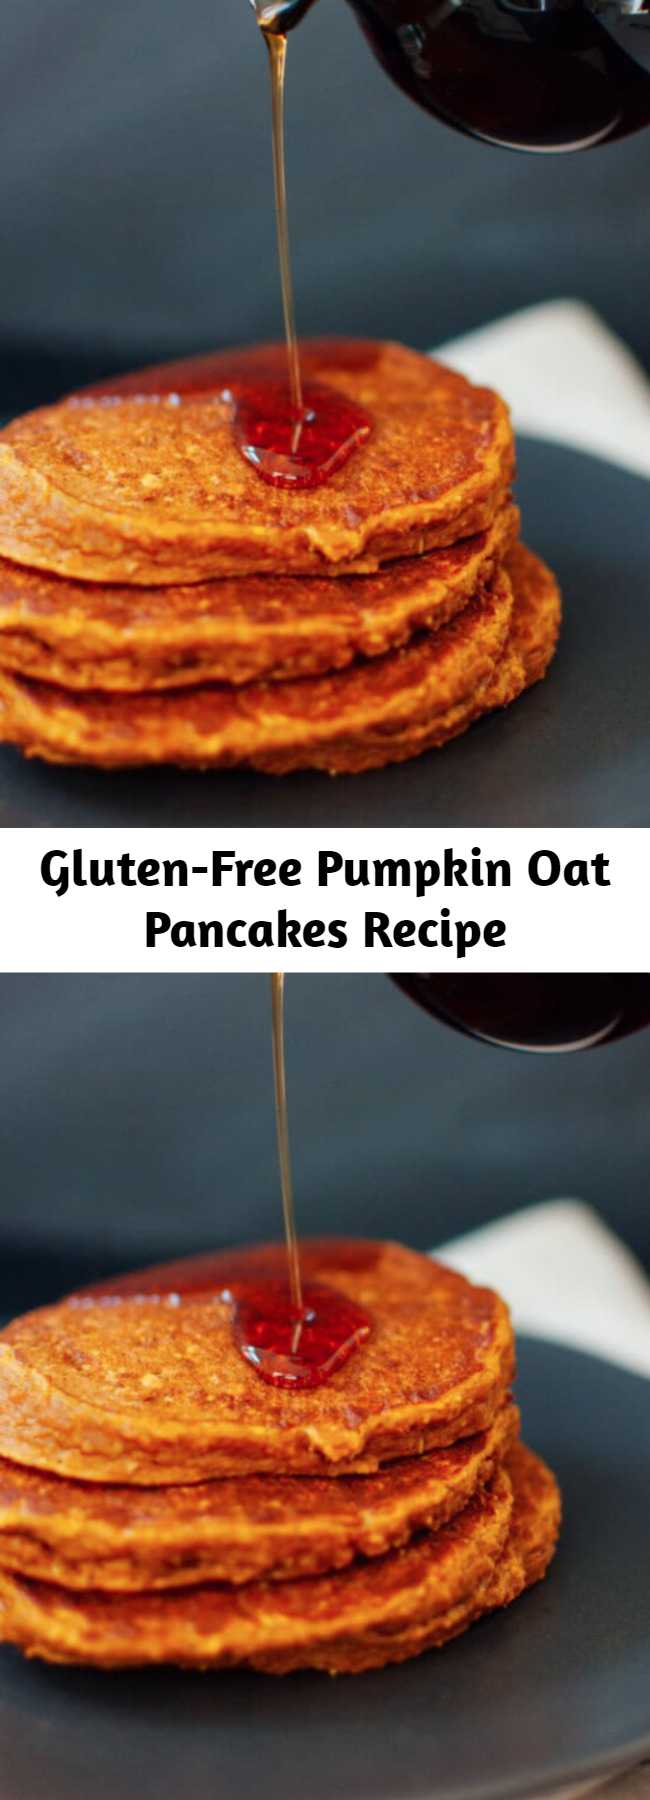 Gluten-Free Pumpkin Oat Pancakes Recipe - These fluffy, healthy pumpkin pancakes are laced with hearty oats and warming spices. Since they are made with oat flour, they are gluten free! Note that these pancakes should be cooked low and slow—use a lower temperature than you would with other pancakes so that the insides of the thick batter get nice and fluffy, but the outsides don’t get overdone.